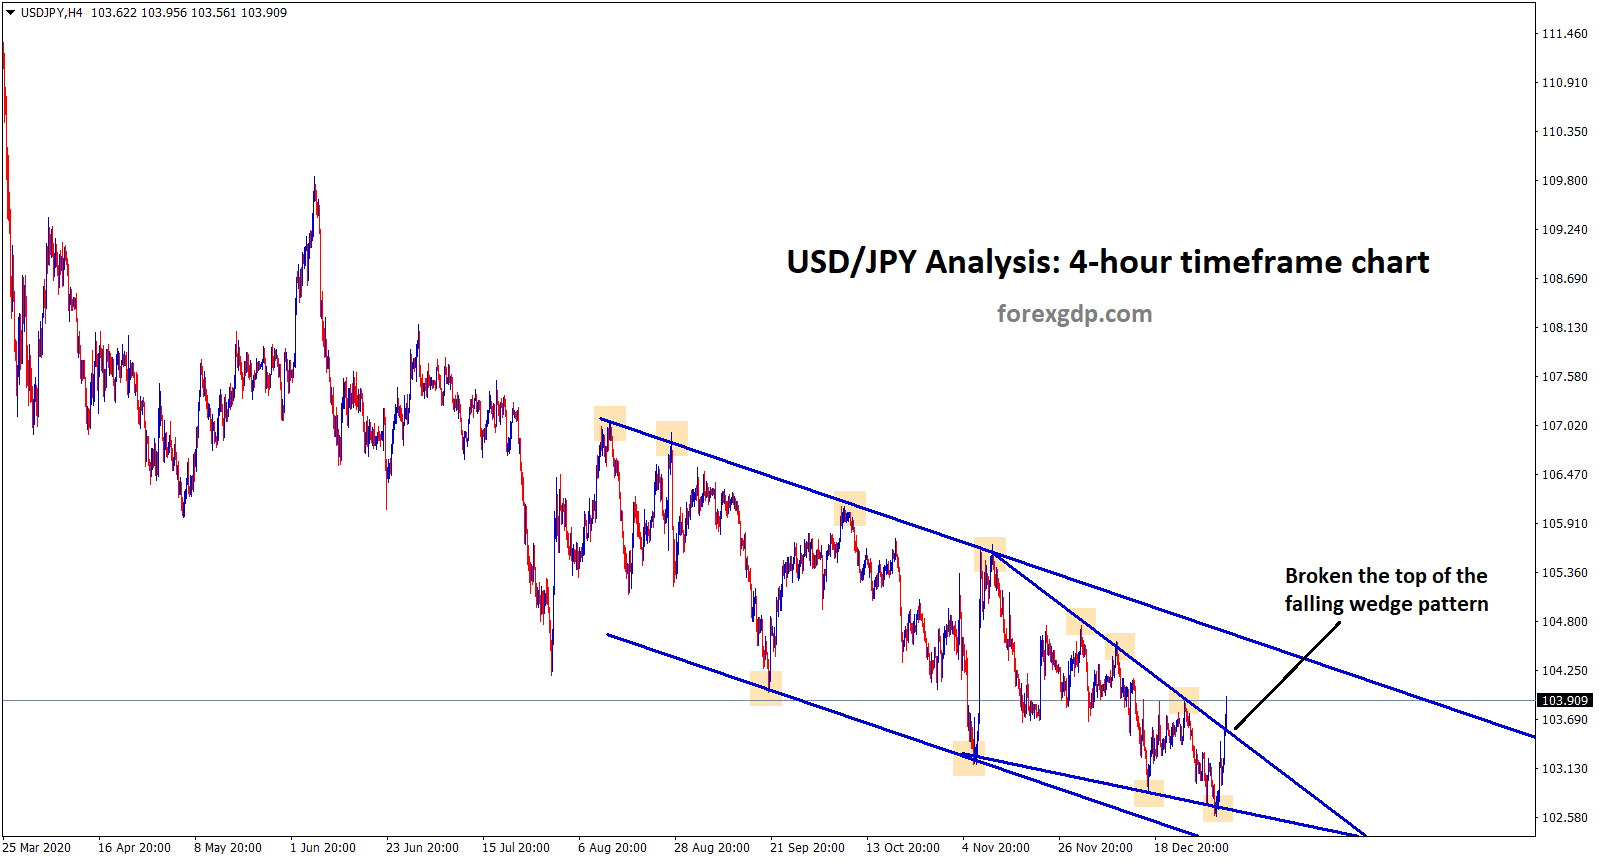 usdjpy broken the top of the falling wedge and going to move to lower high of channel